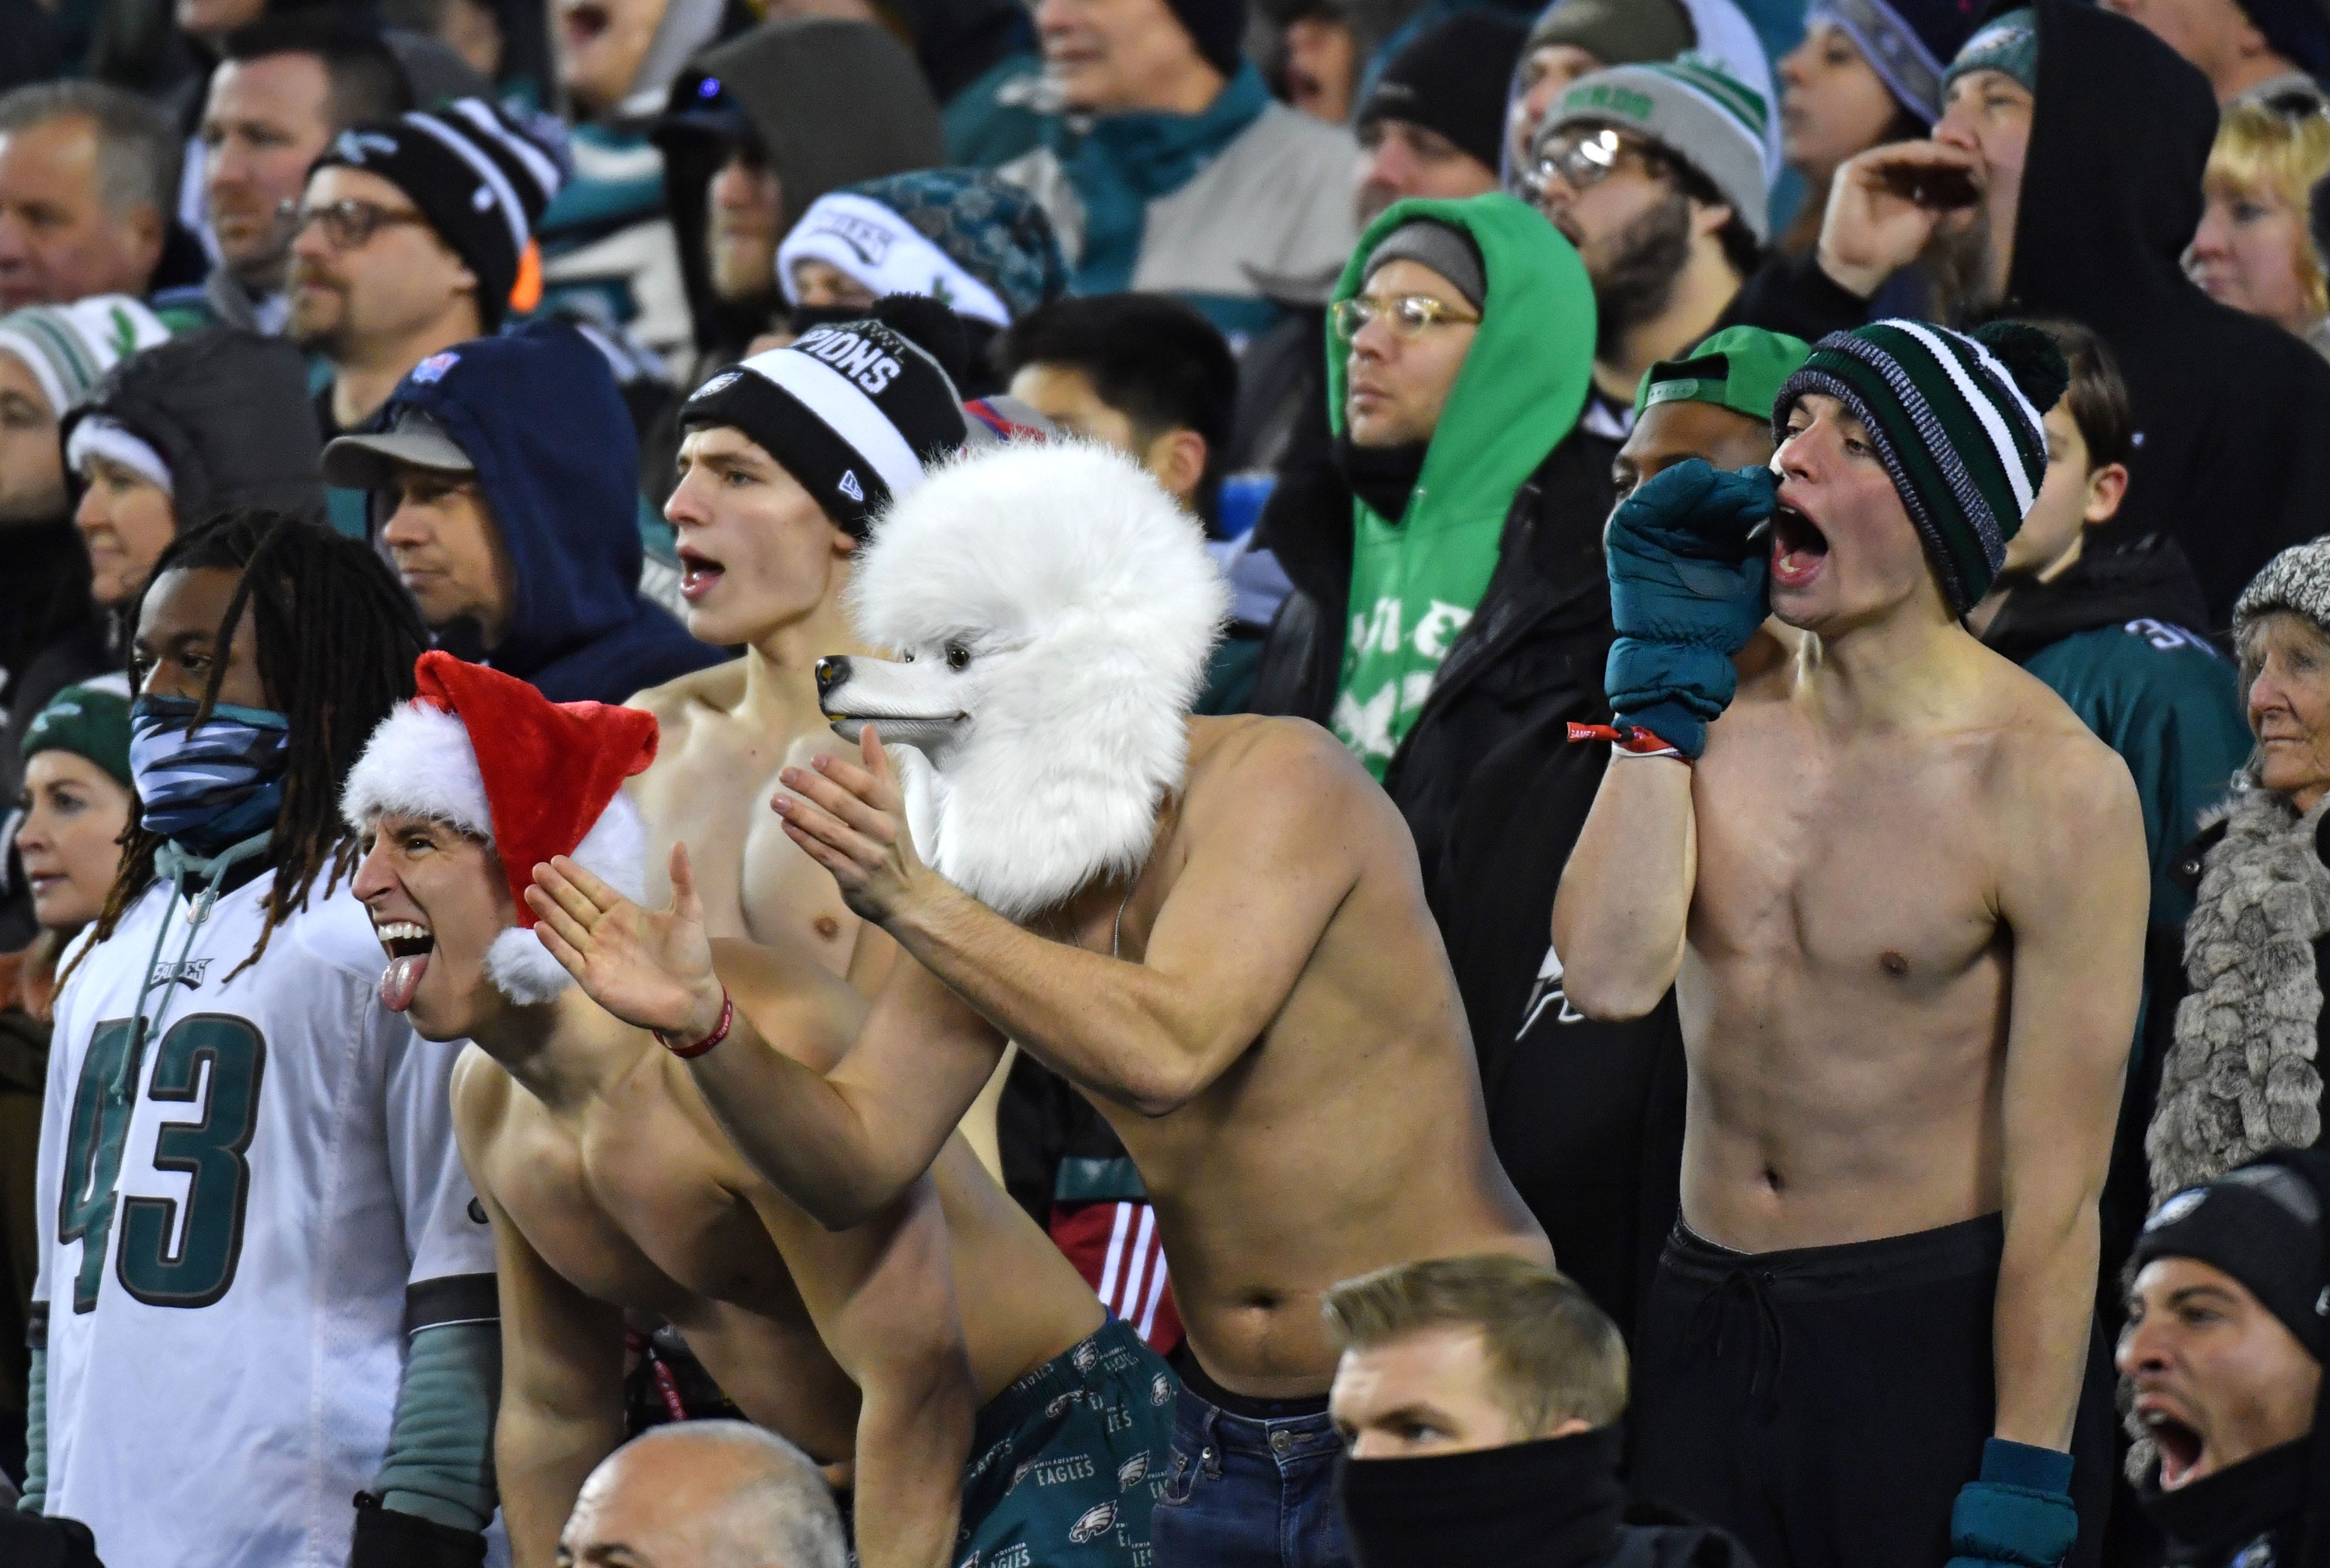 Philadelphia city officials say Eagles won't be allowed to have fans in stands this season